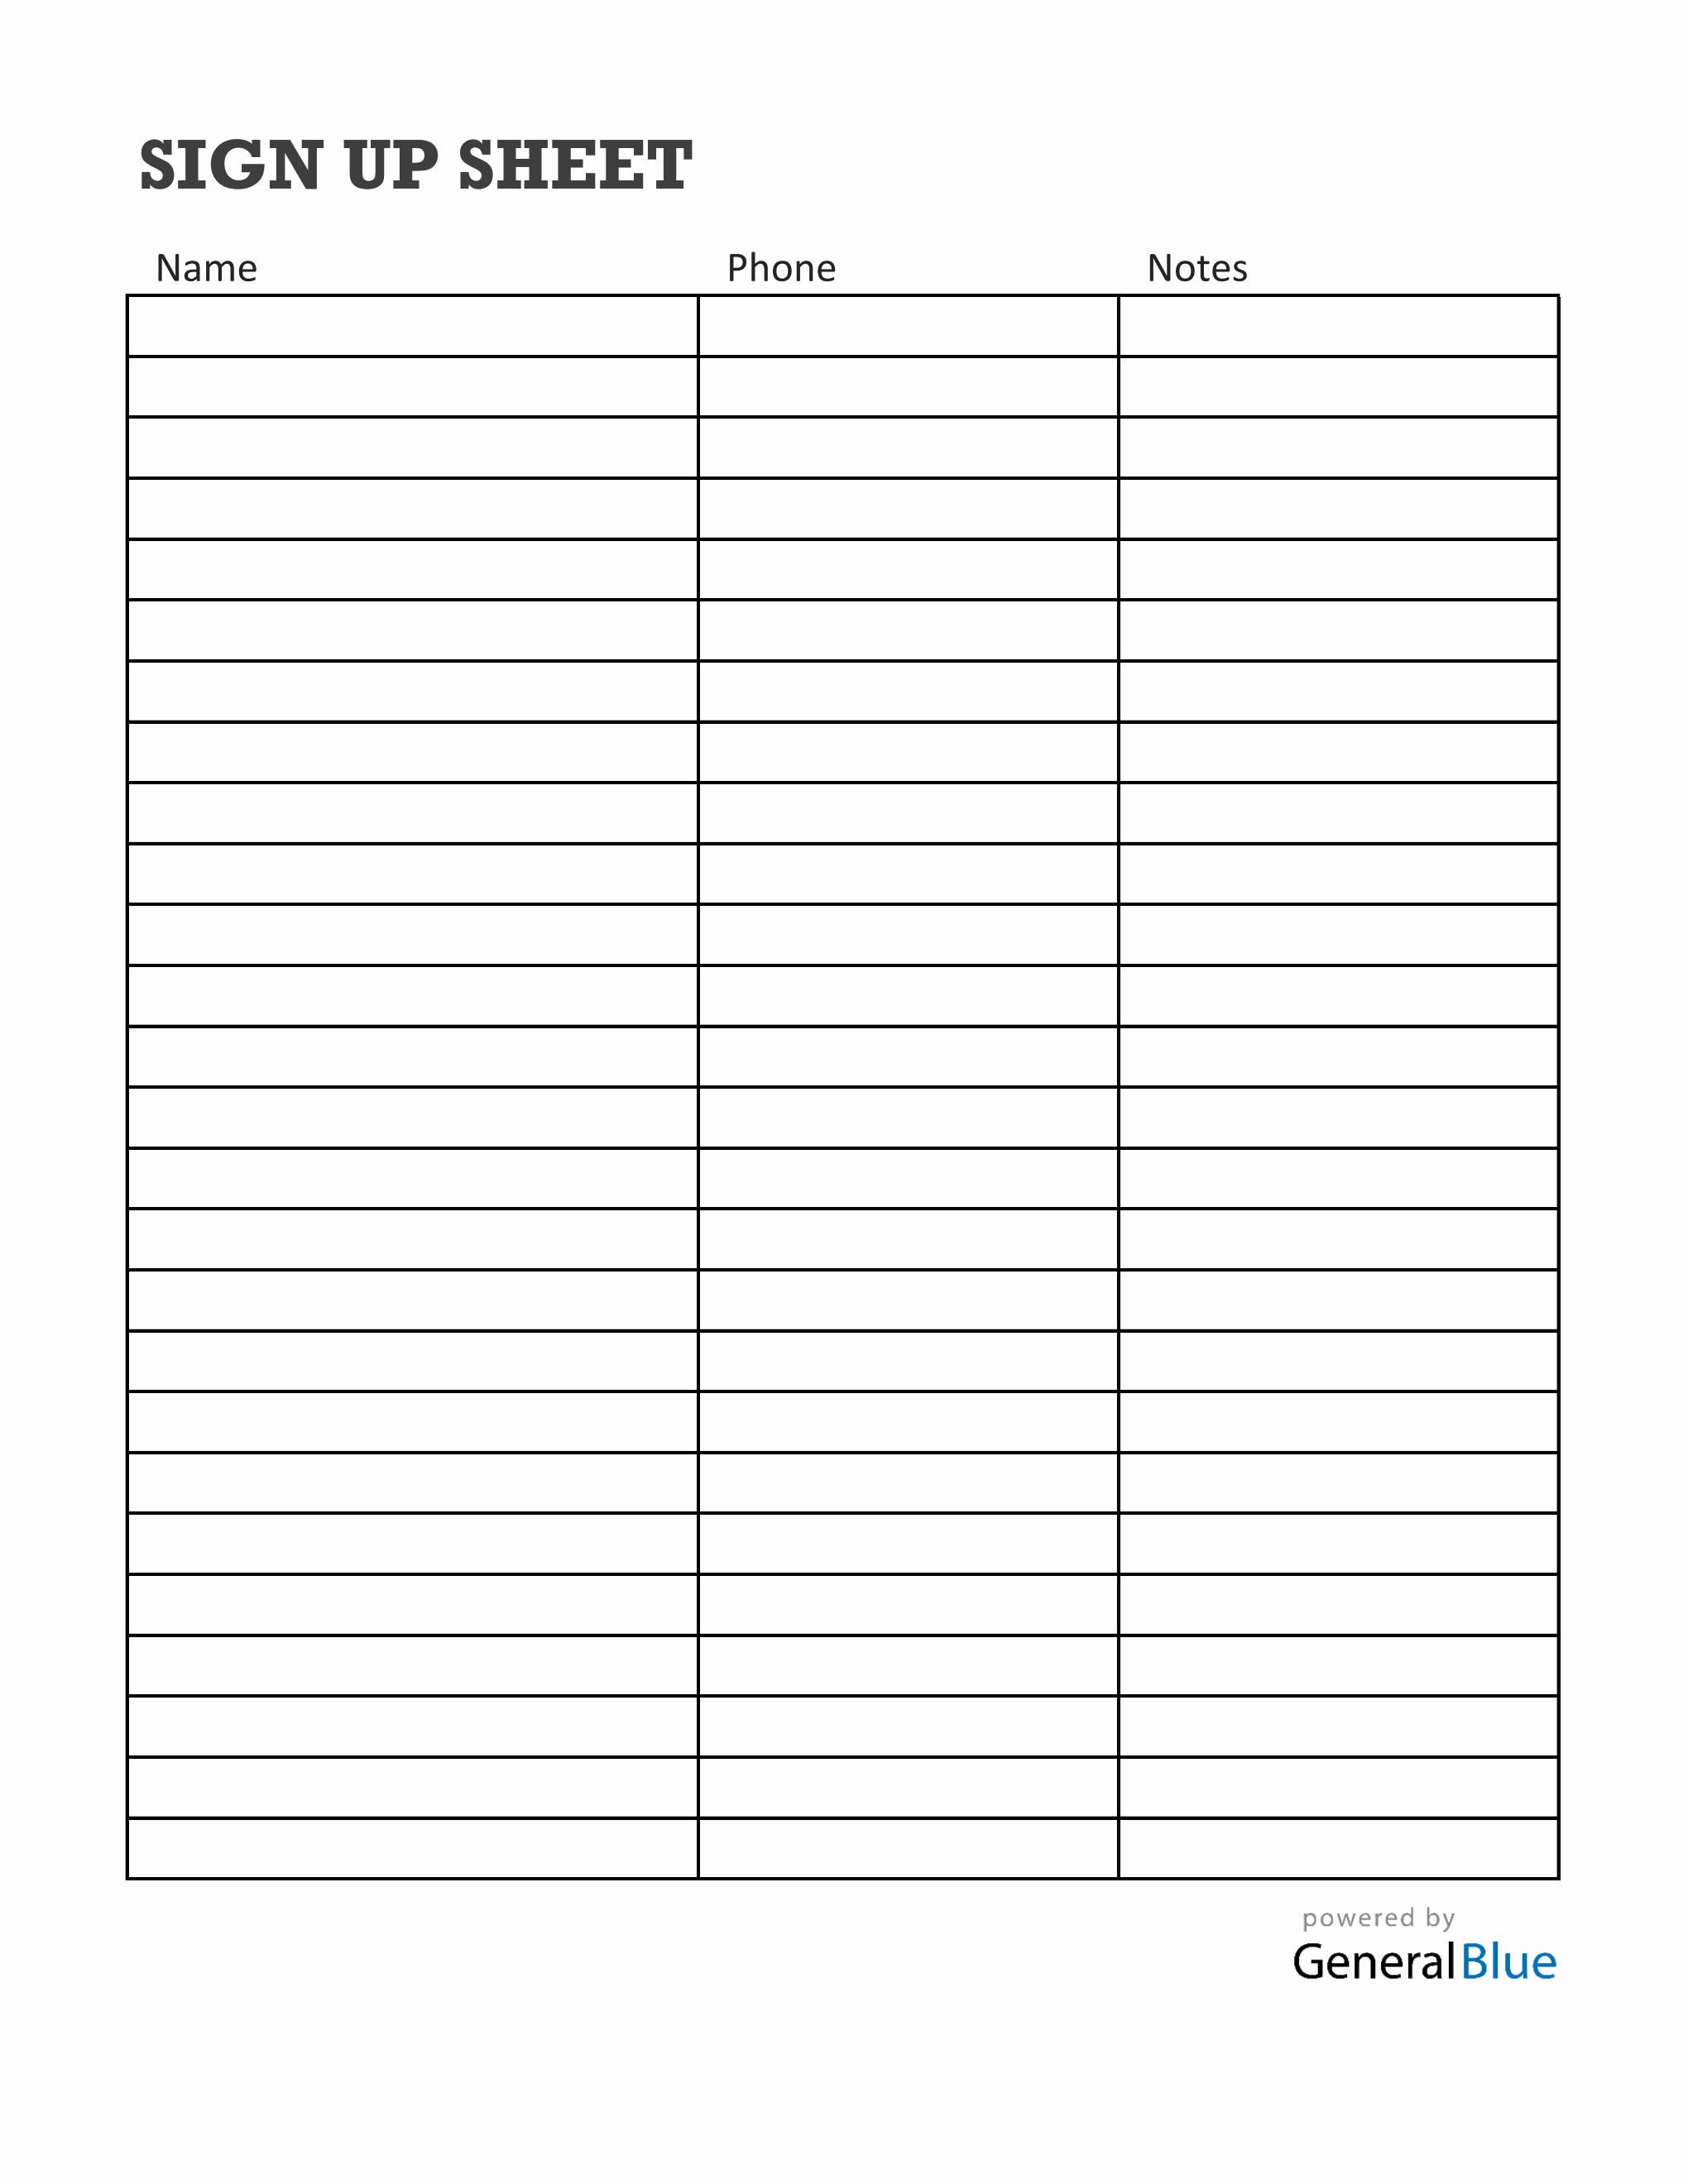 Printable Blank Signing In Sheet Template